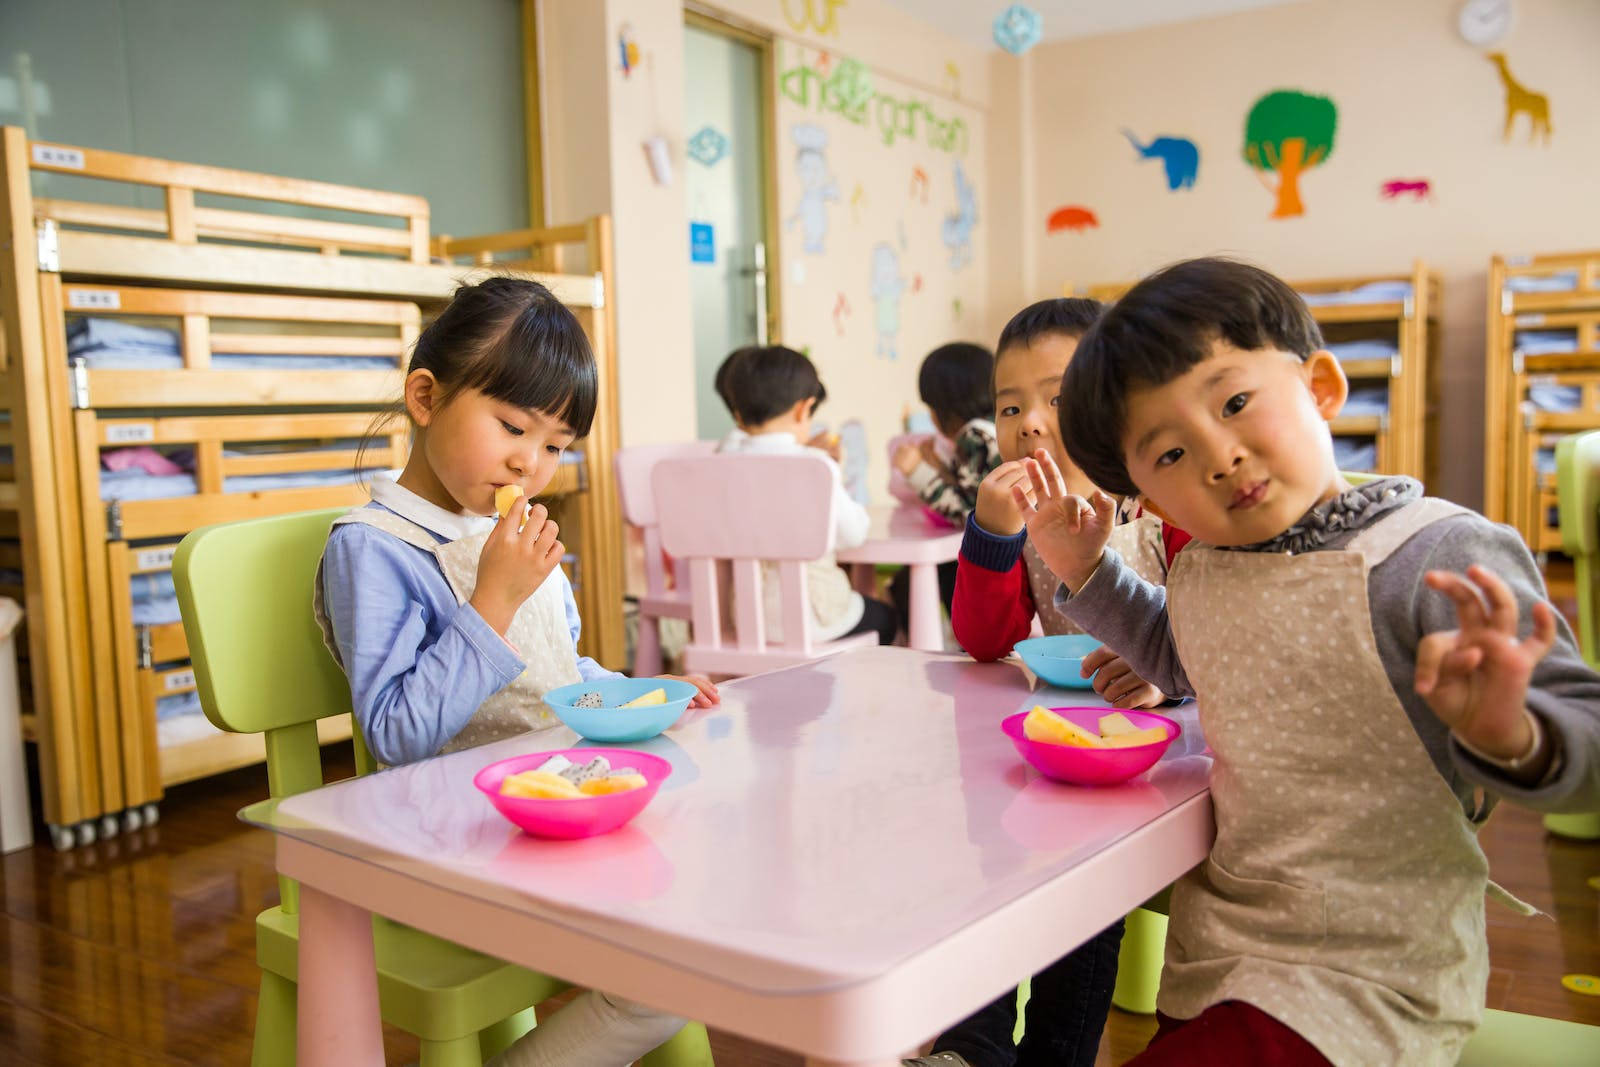 Children Eating At School Education Background